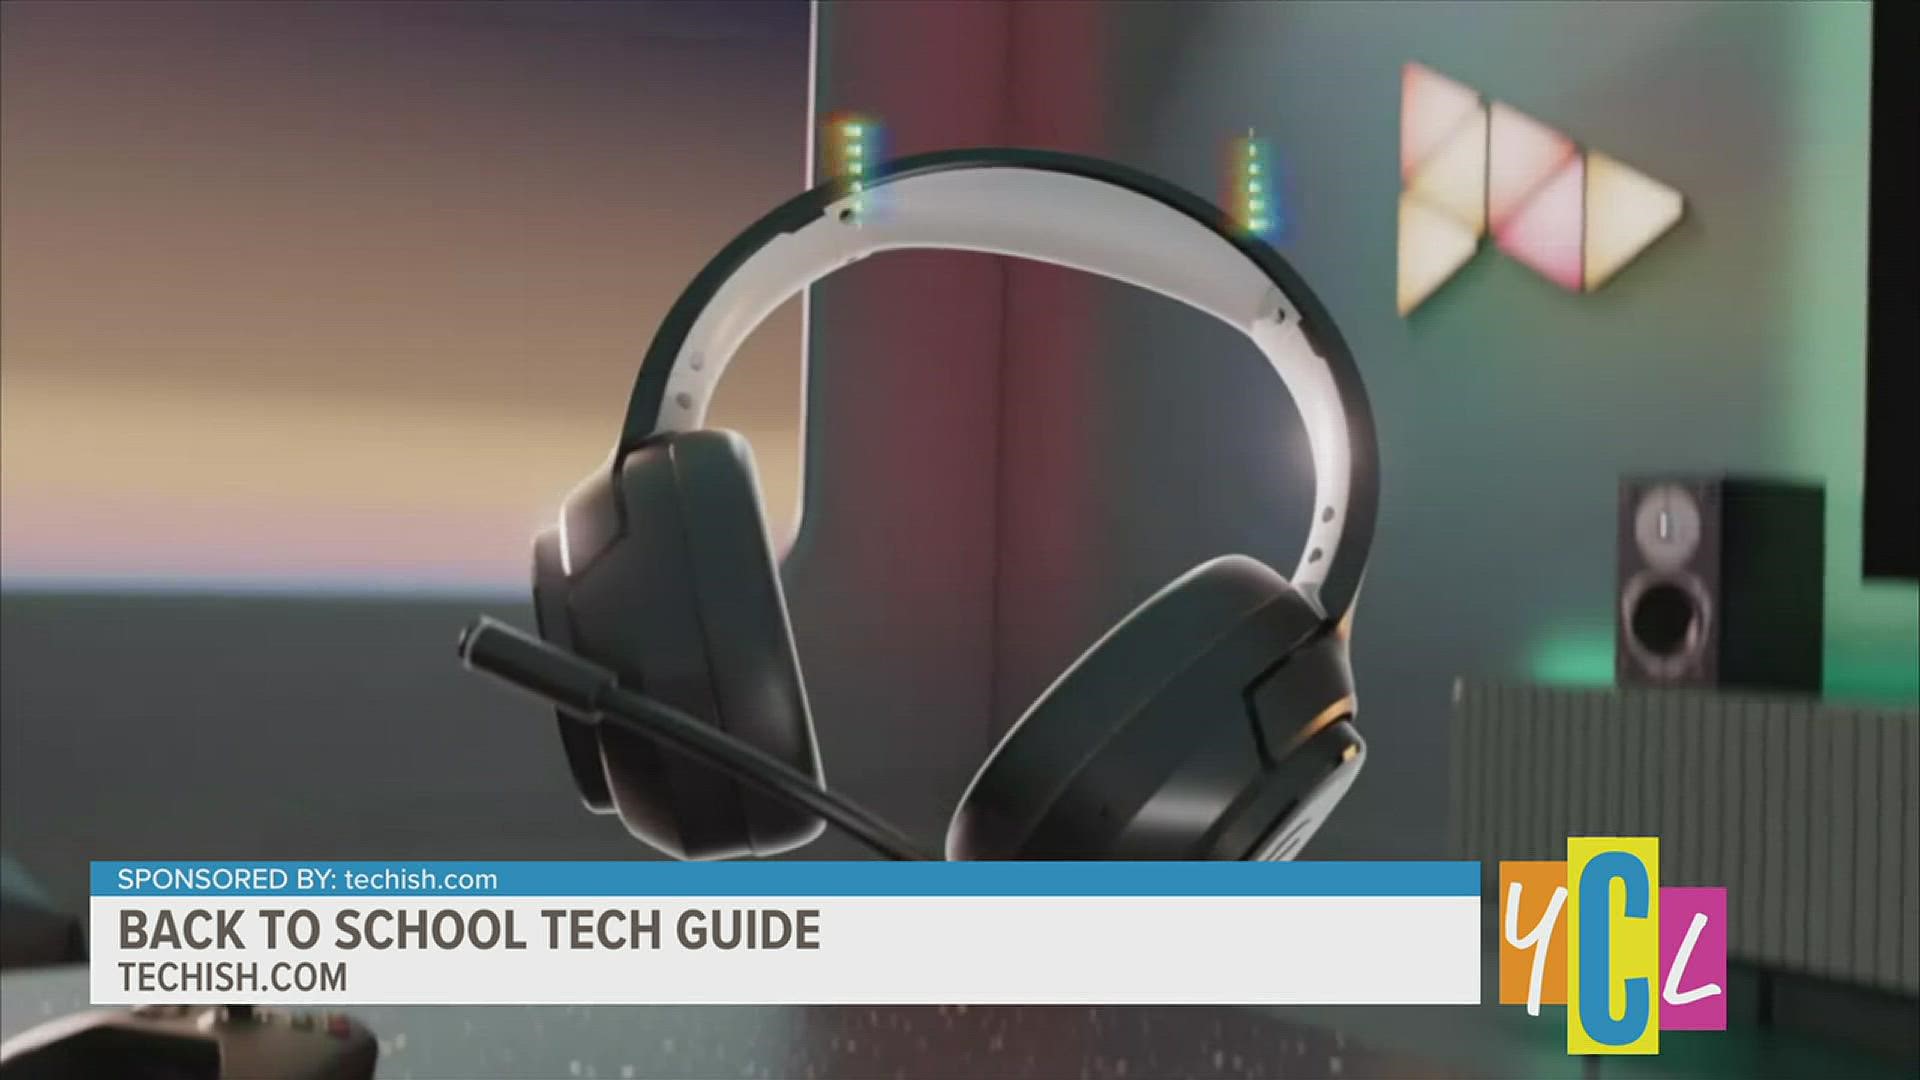 Cut back on spending while still scoring big on back to school must-haves with Tech-Life Expert, Jennifer Jolly. This segment paid for by techish.com